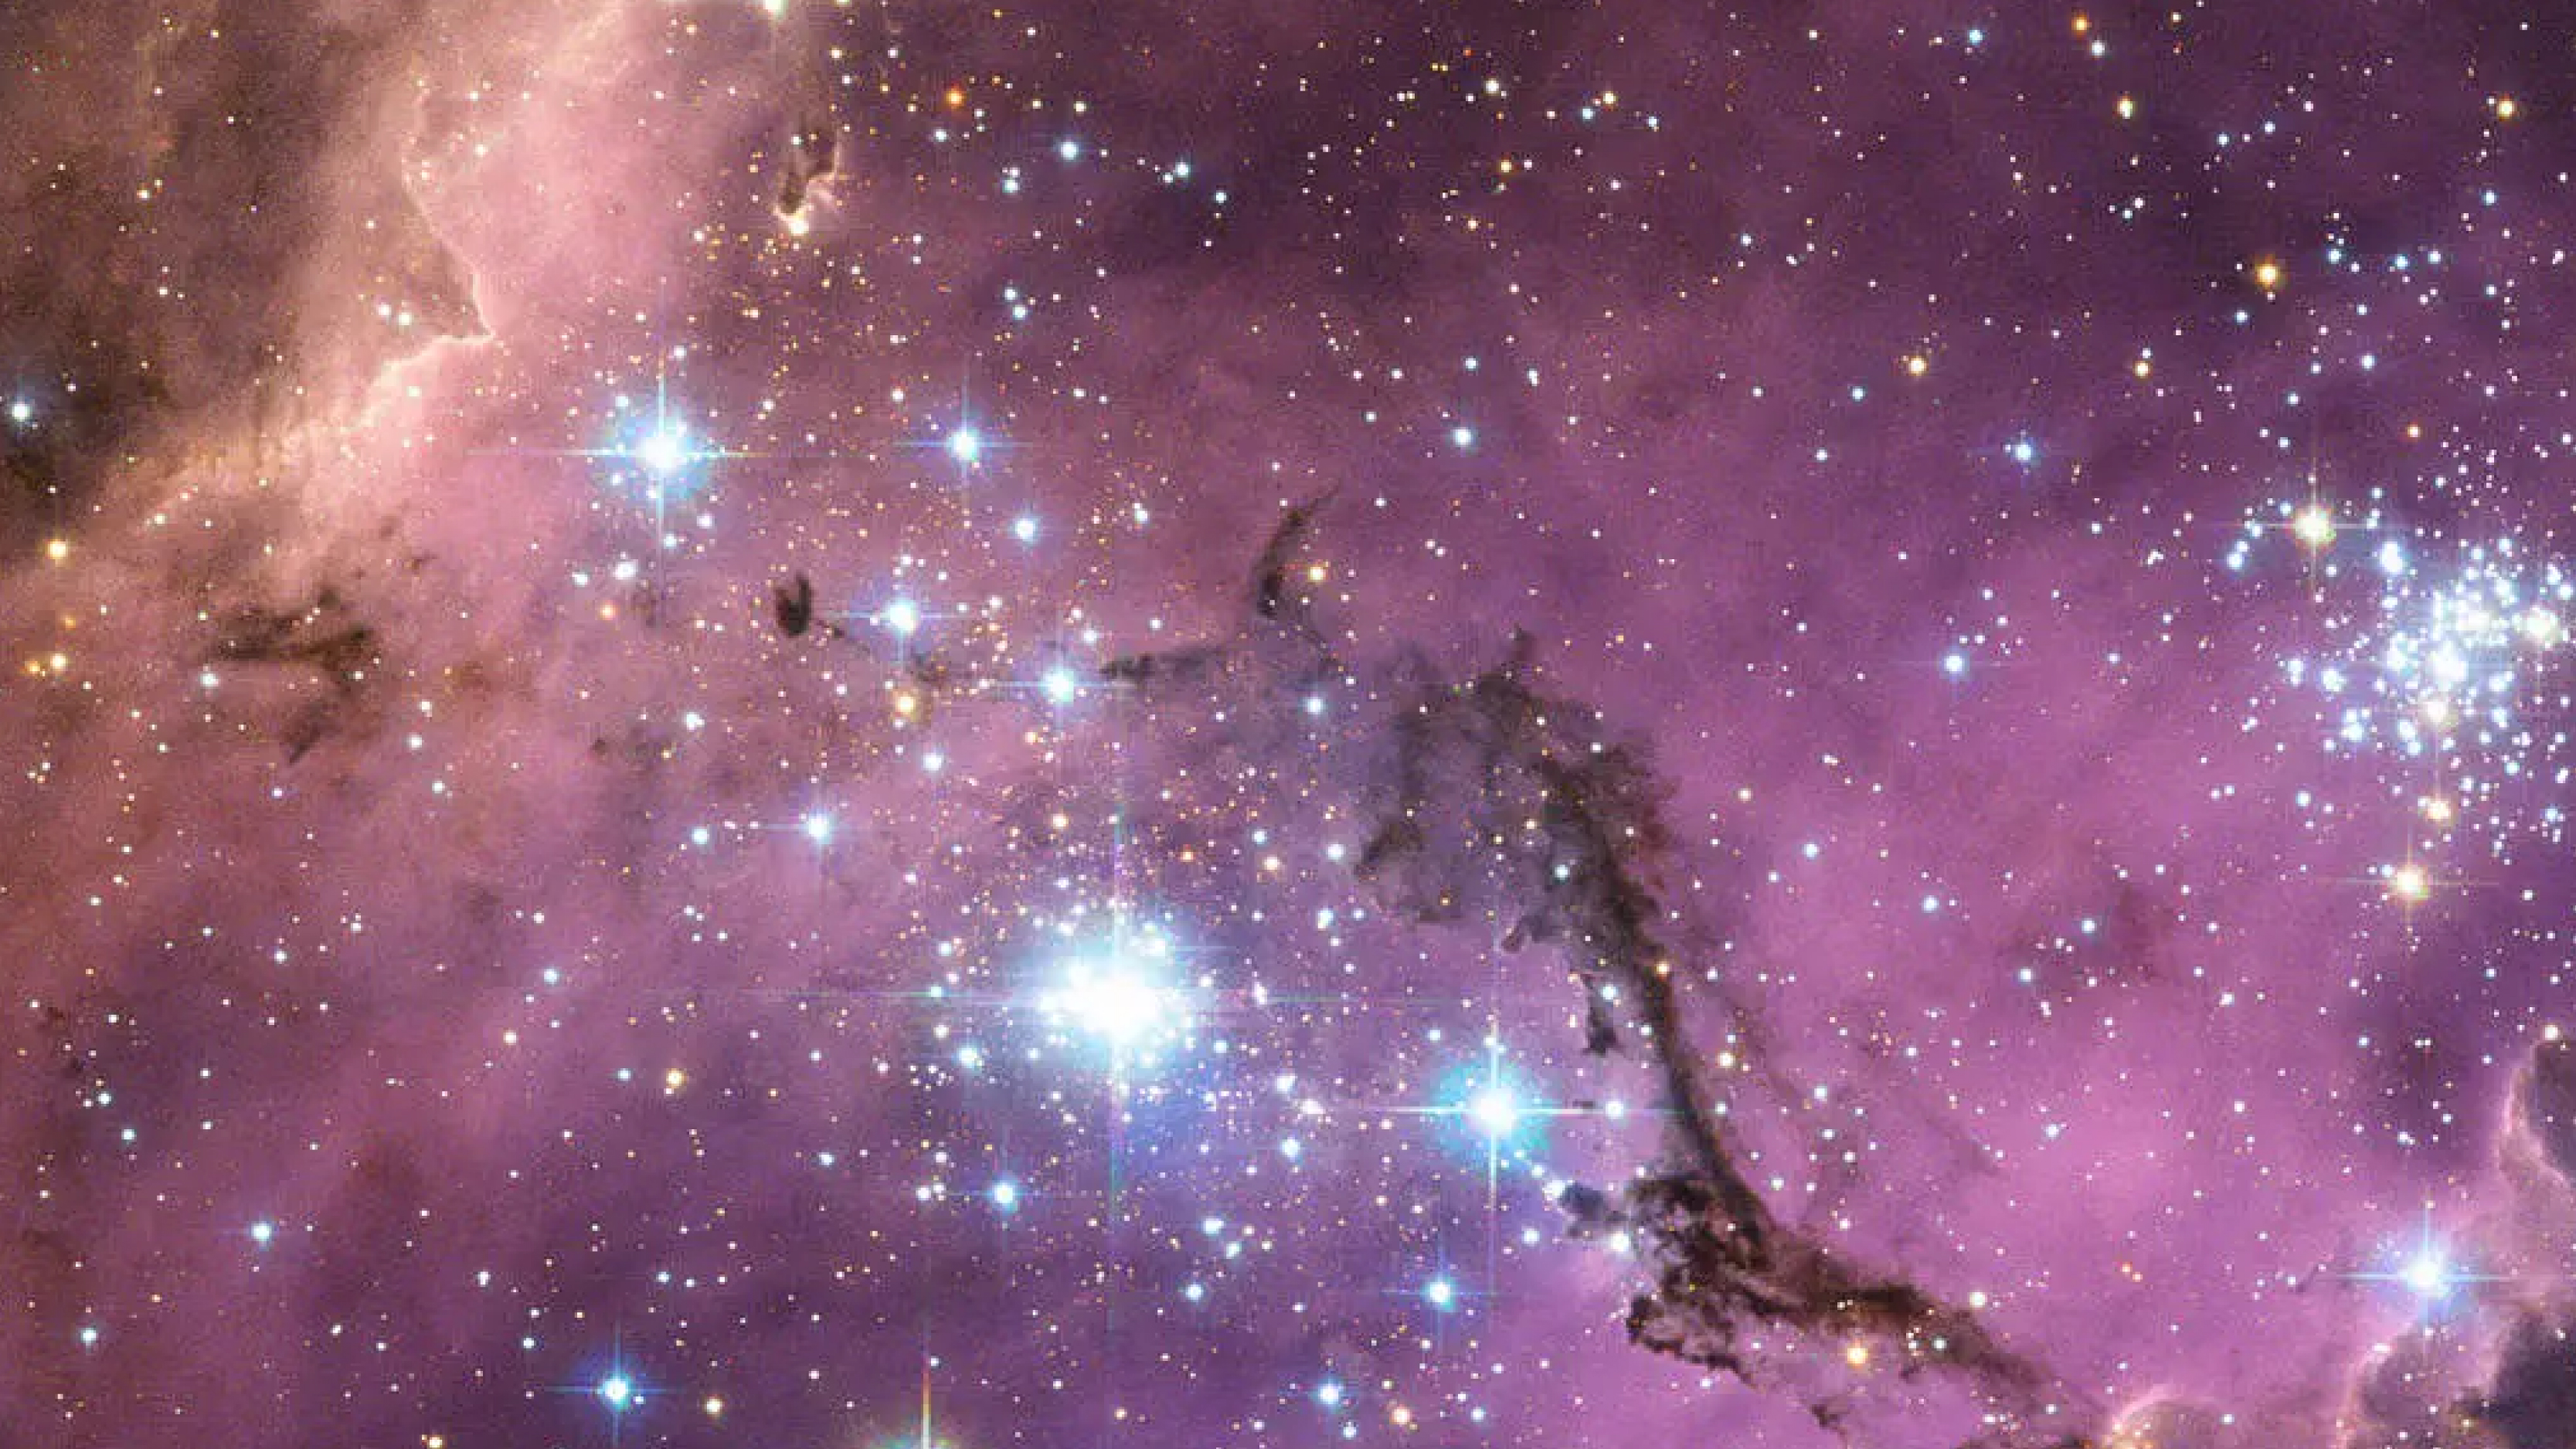 Thick clouds of purple and pastel pink cover a speckled field of stars with clusters of large and especially bright blue and yellow stars glowing through the clouds.